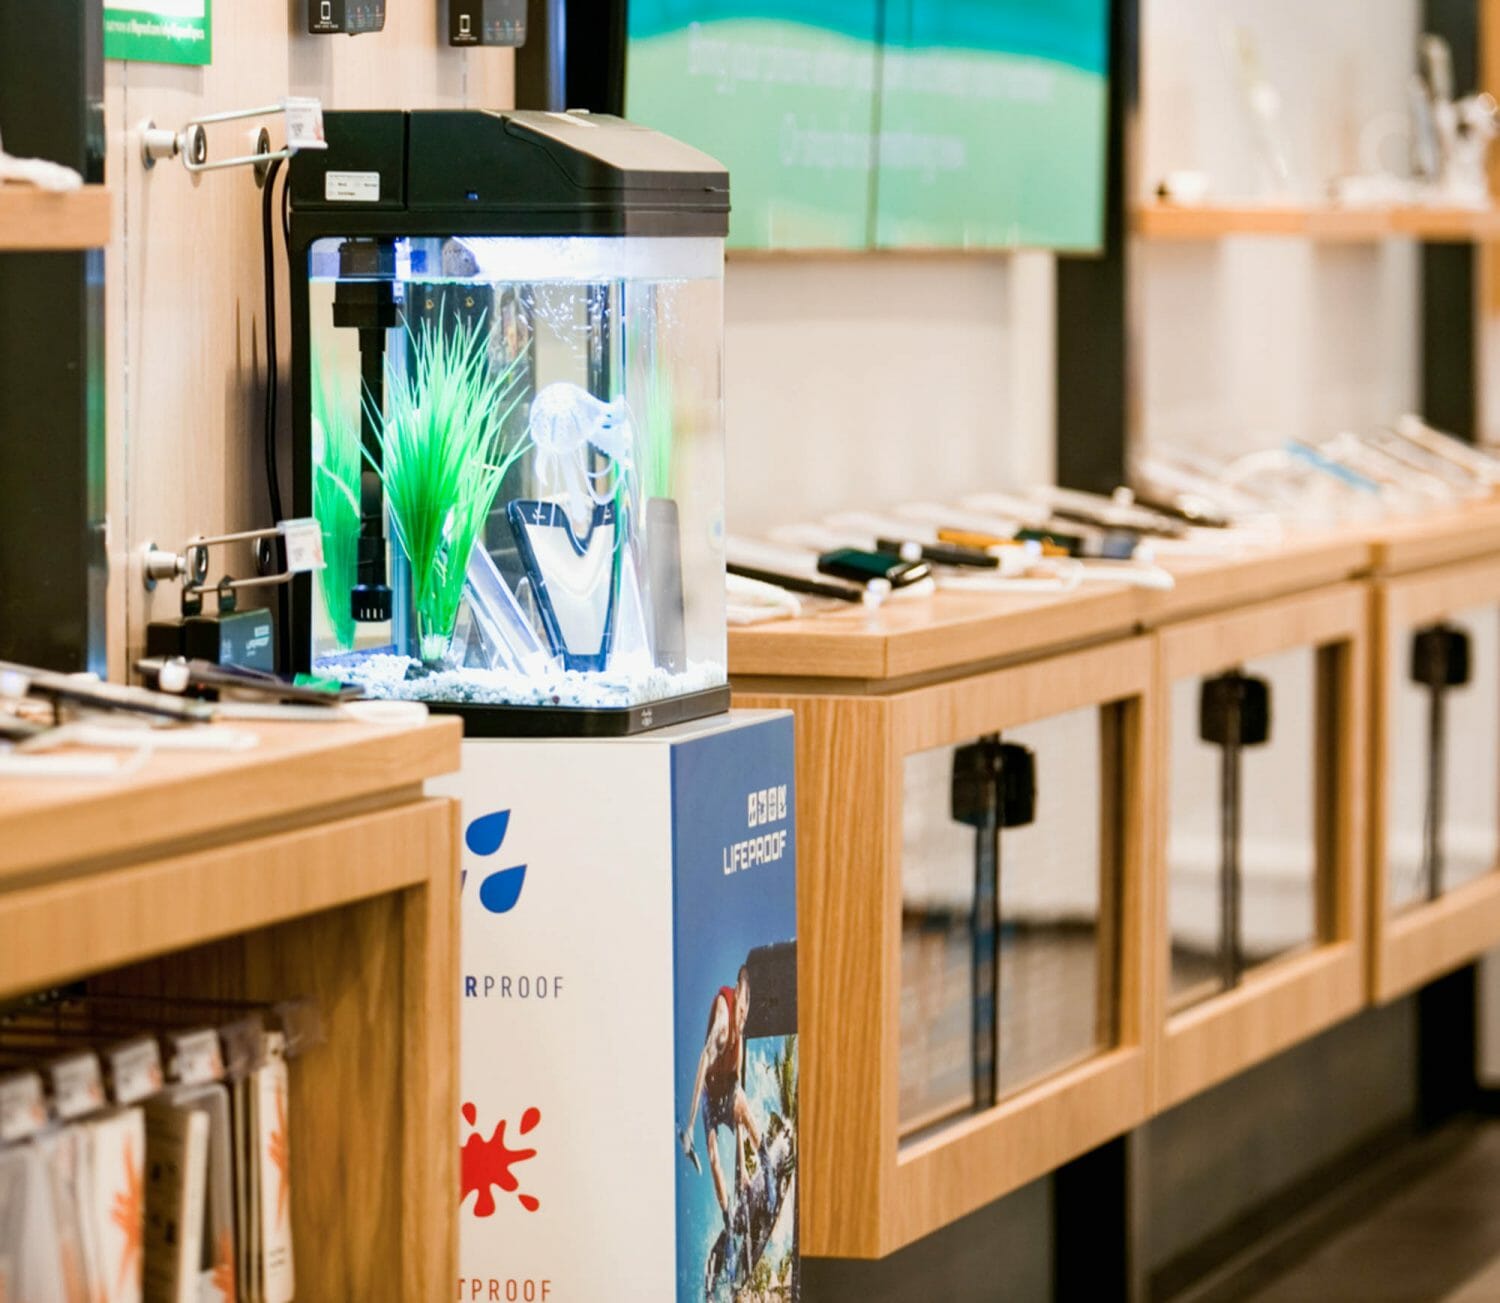 Product Displays of Spark